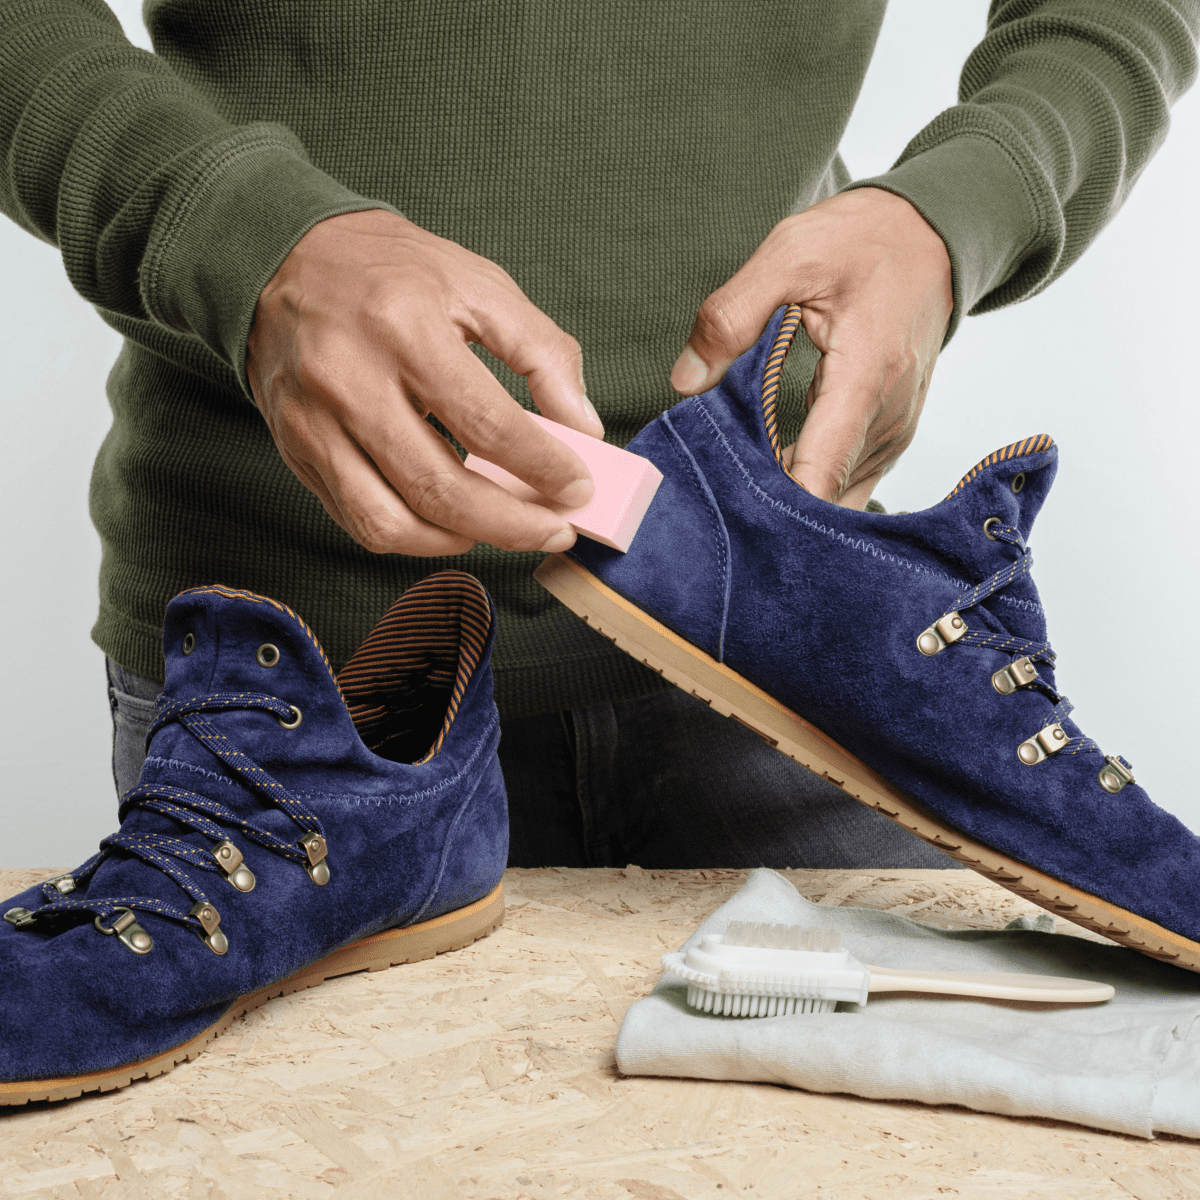 Cleaning Suede Shoes: Expert Tips & Advice